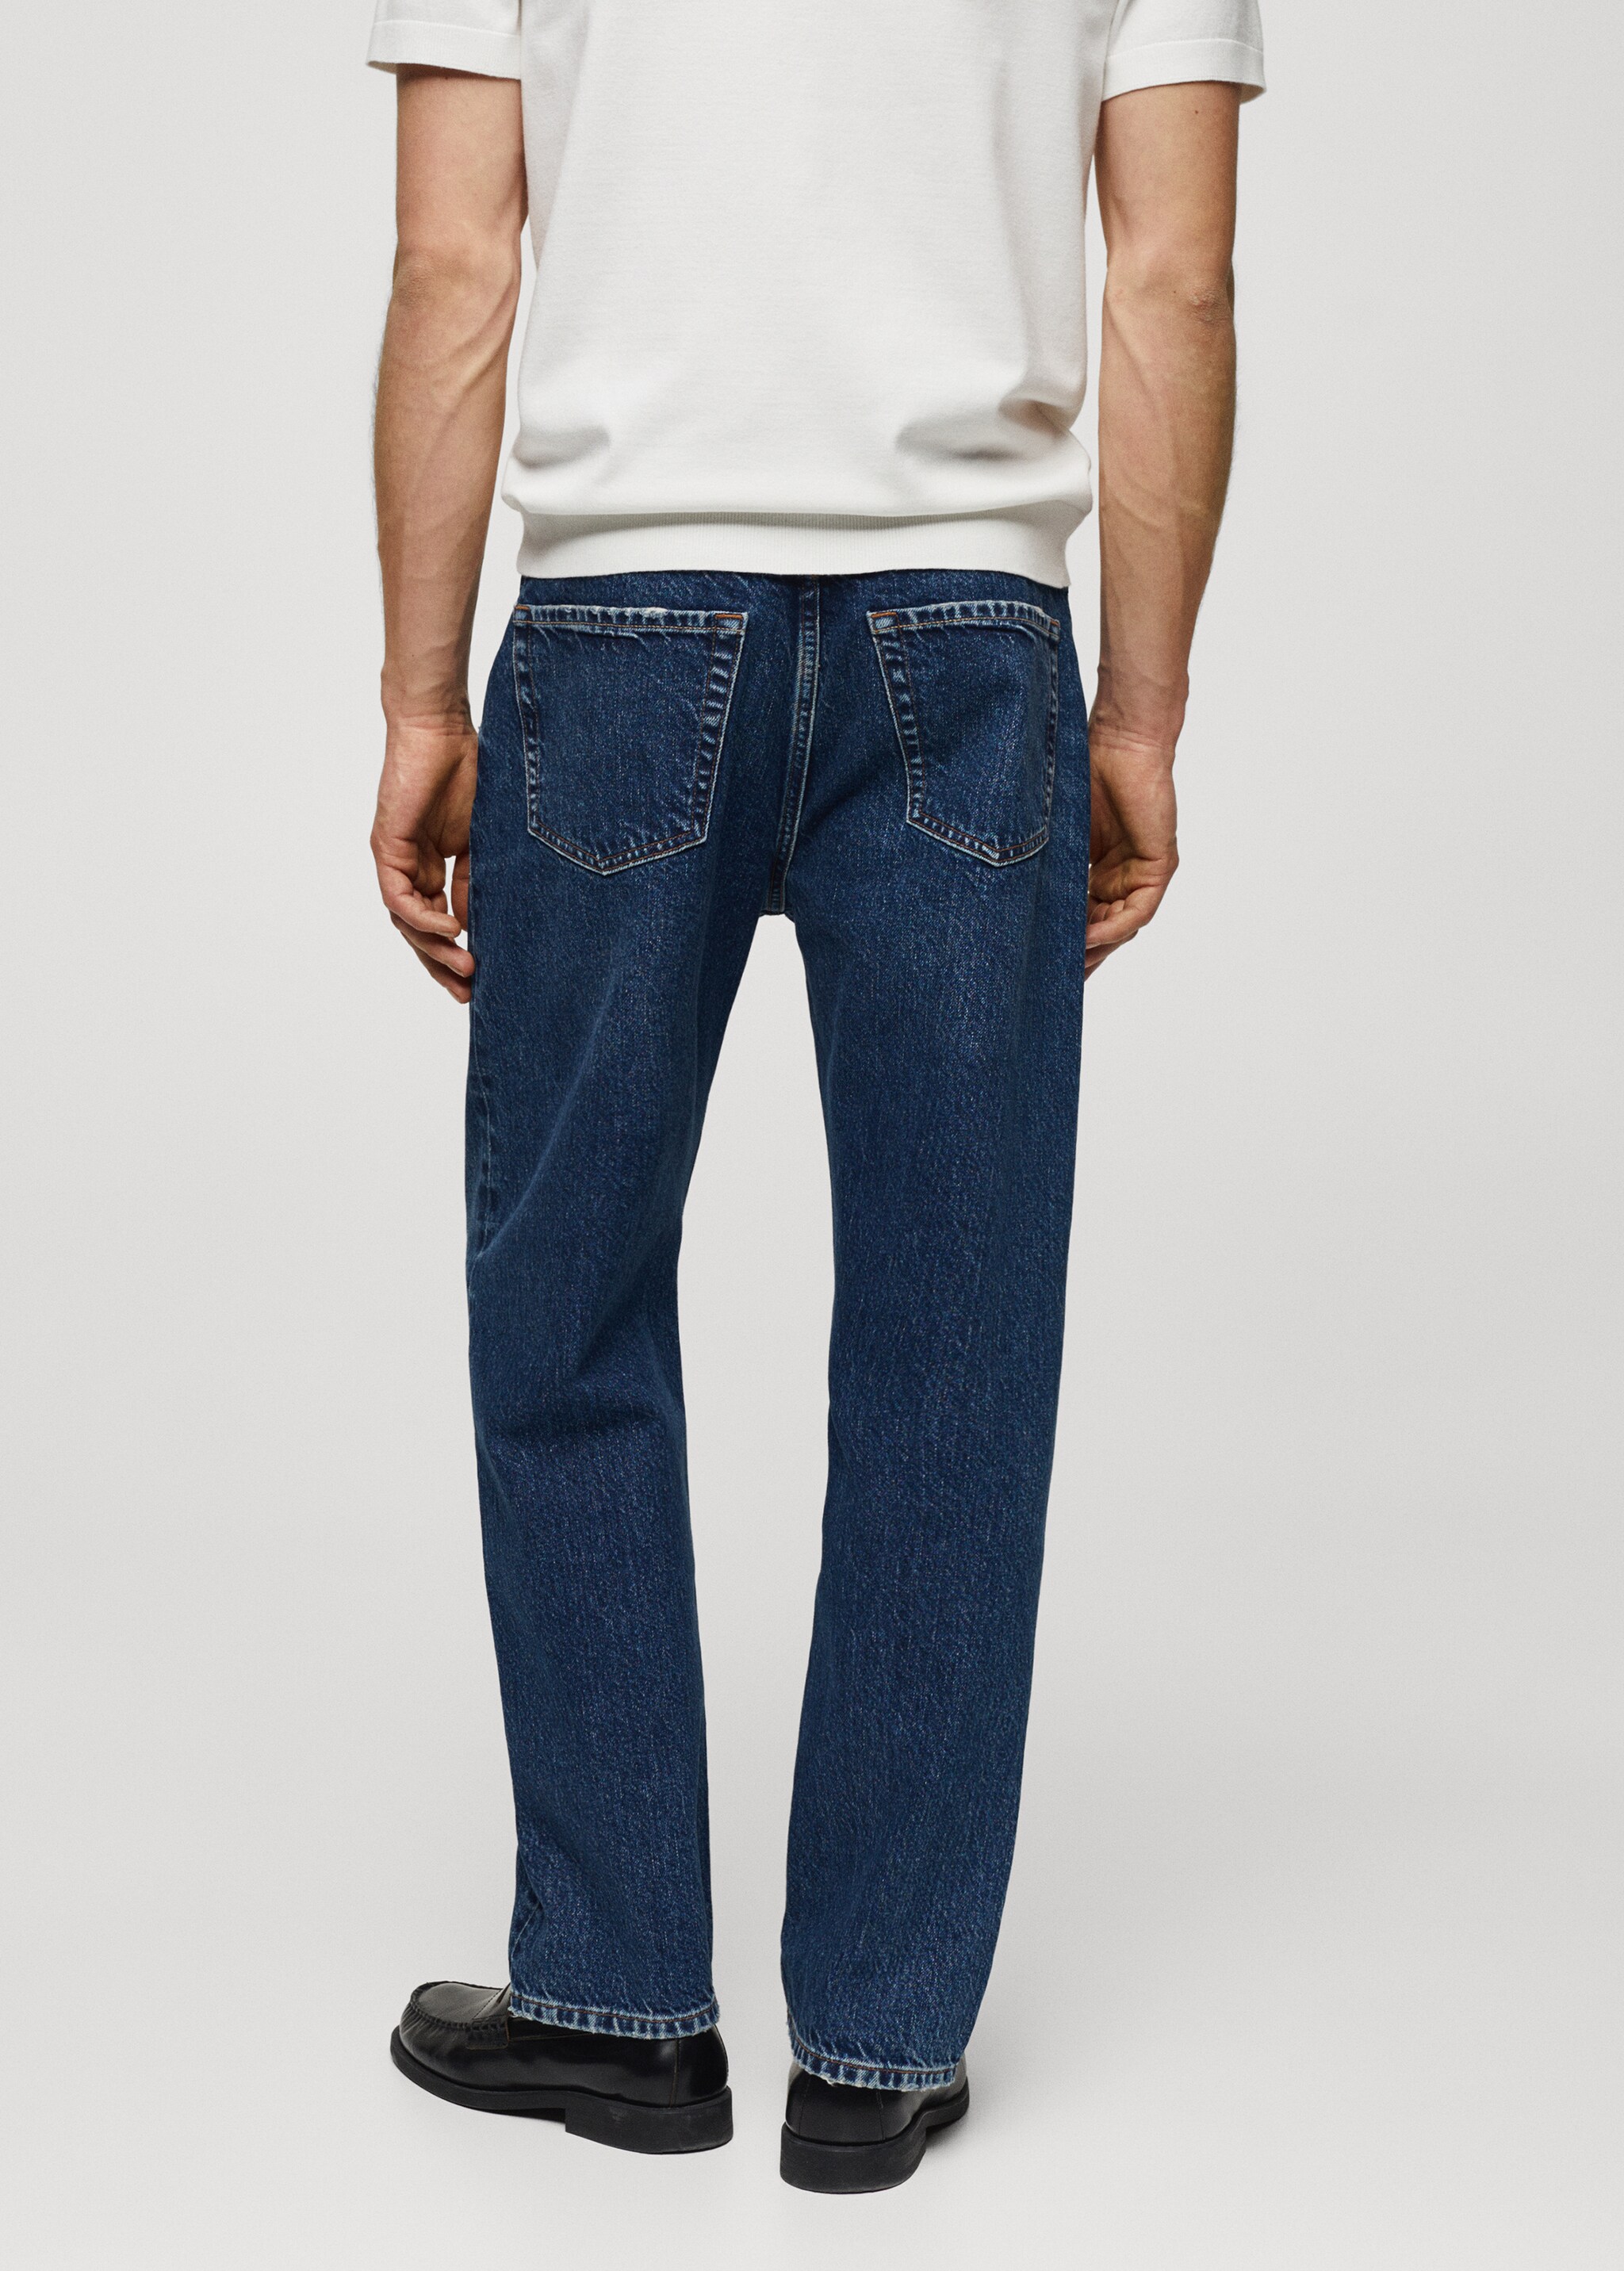 Regular fit dark wash jeans - Reverse of the article